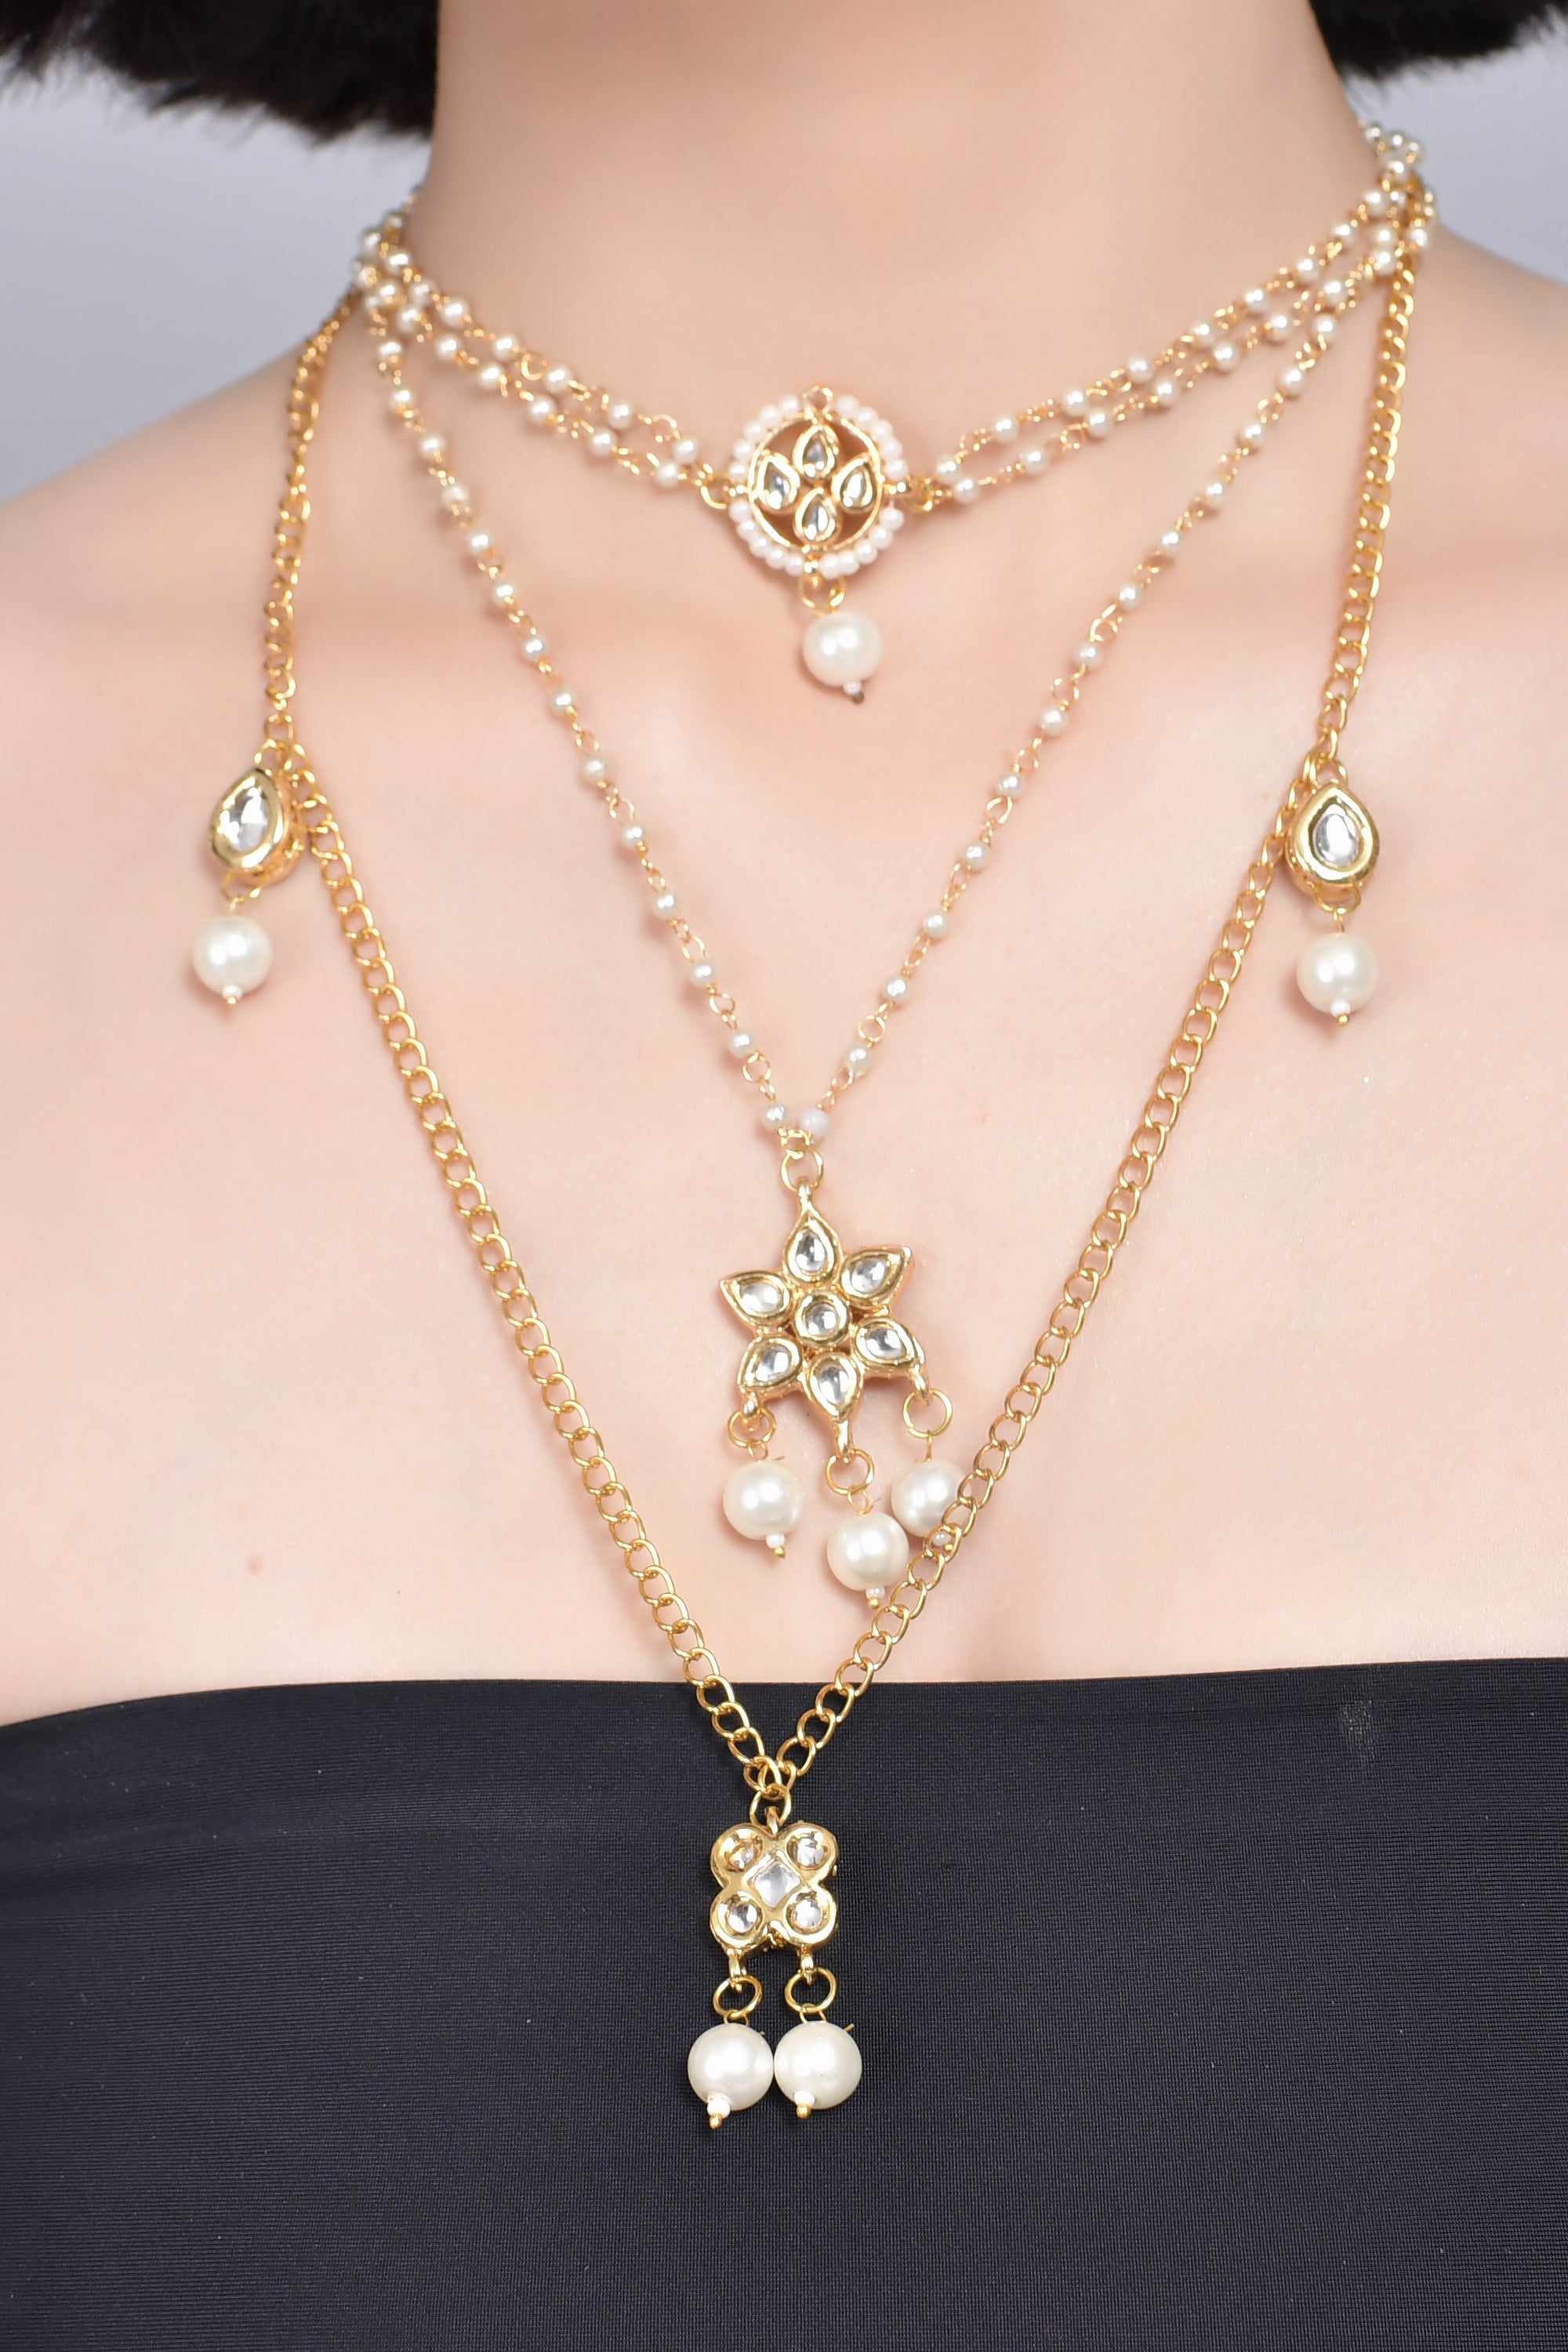 Multilayered pearl beaded Kundan embellished necklace teamed with choker